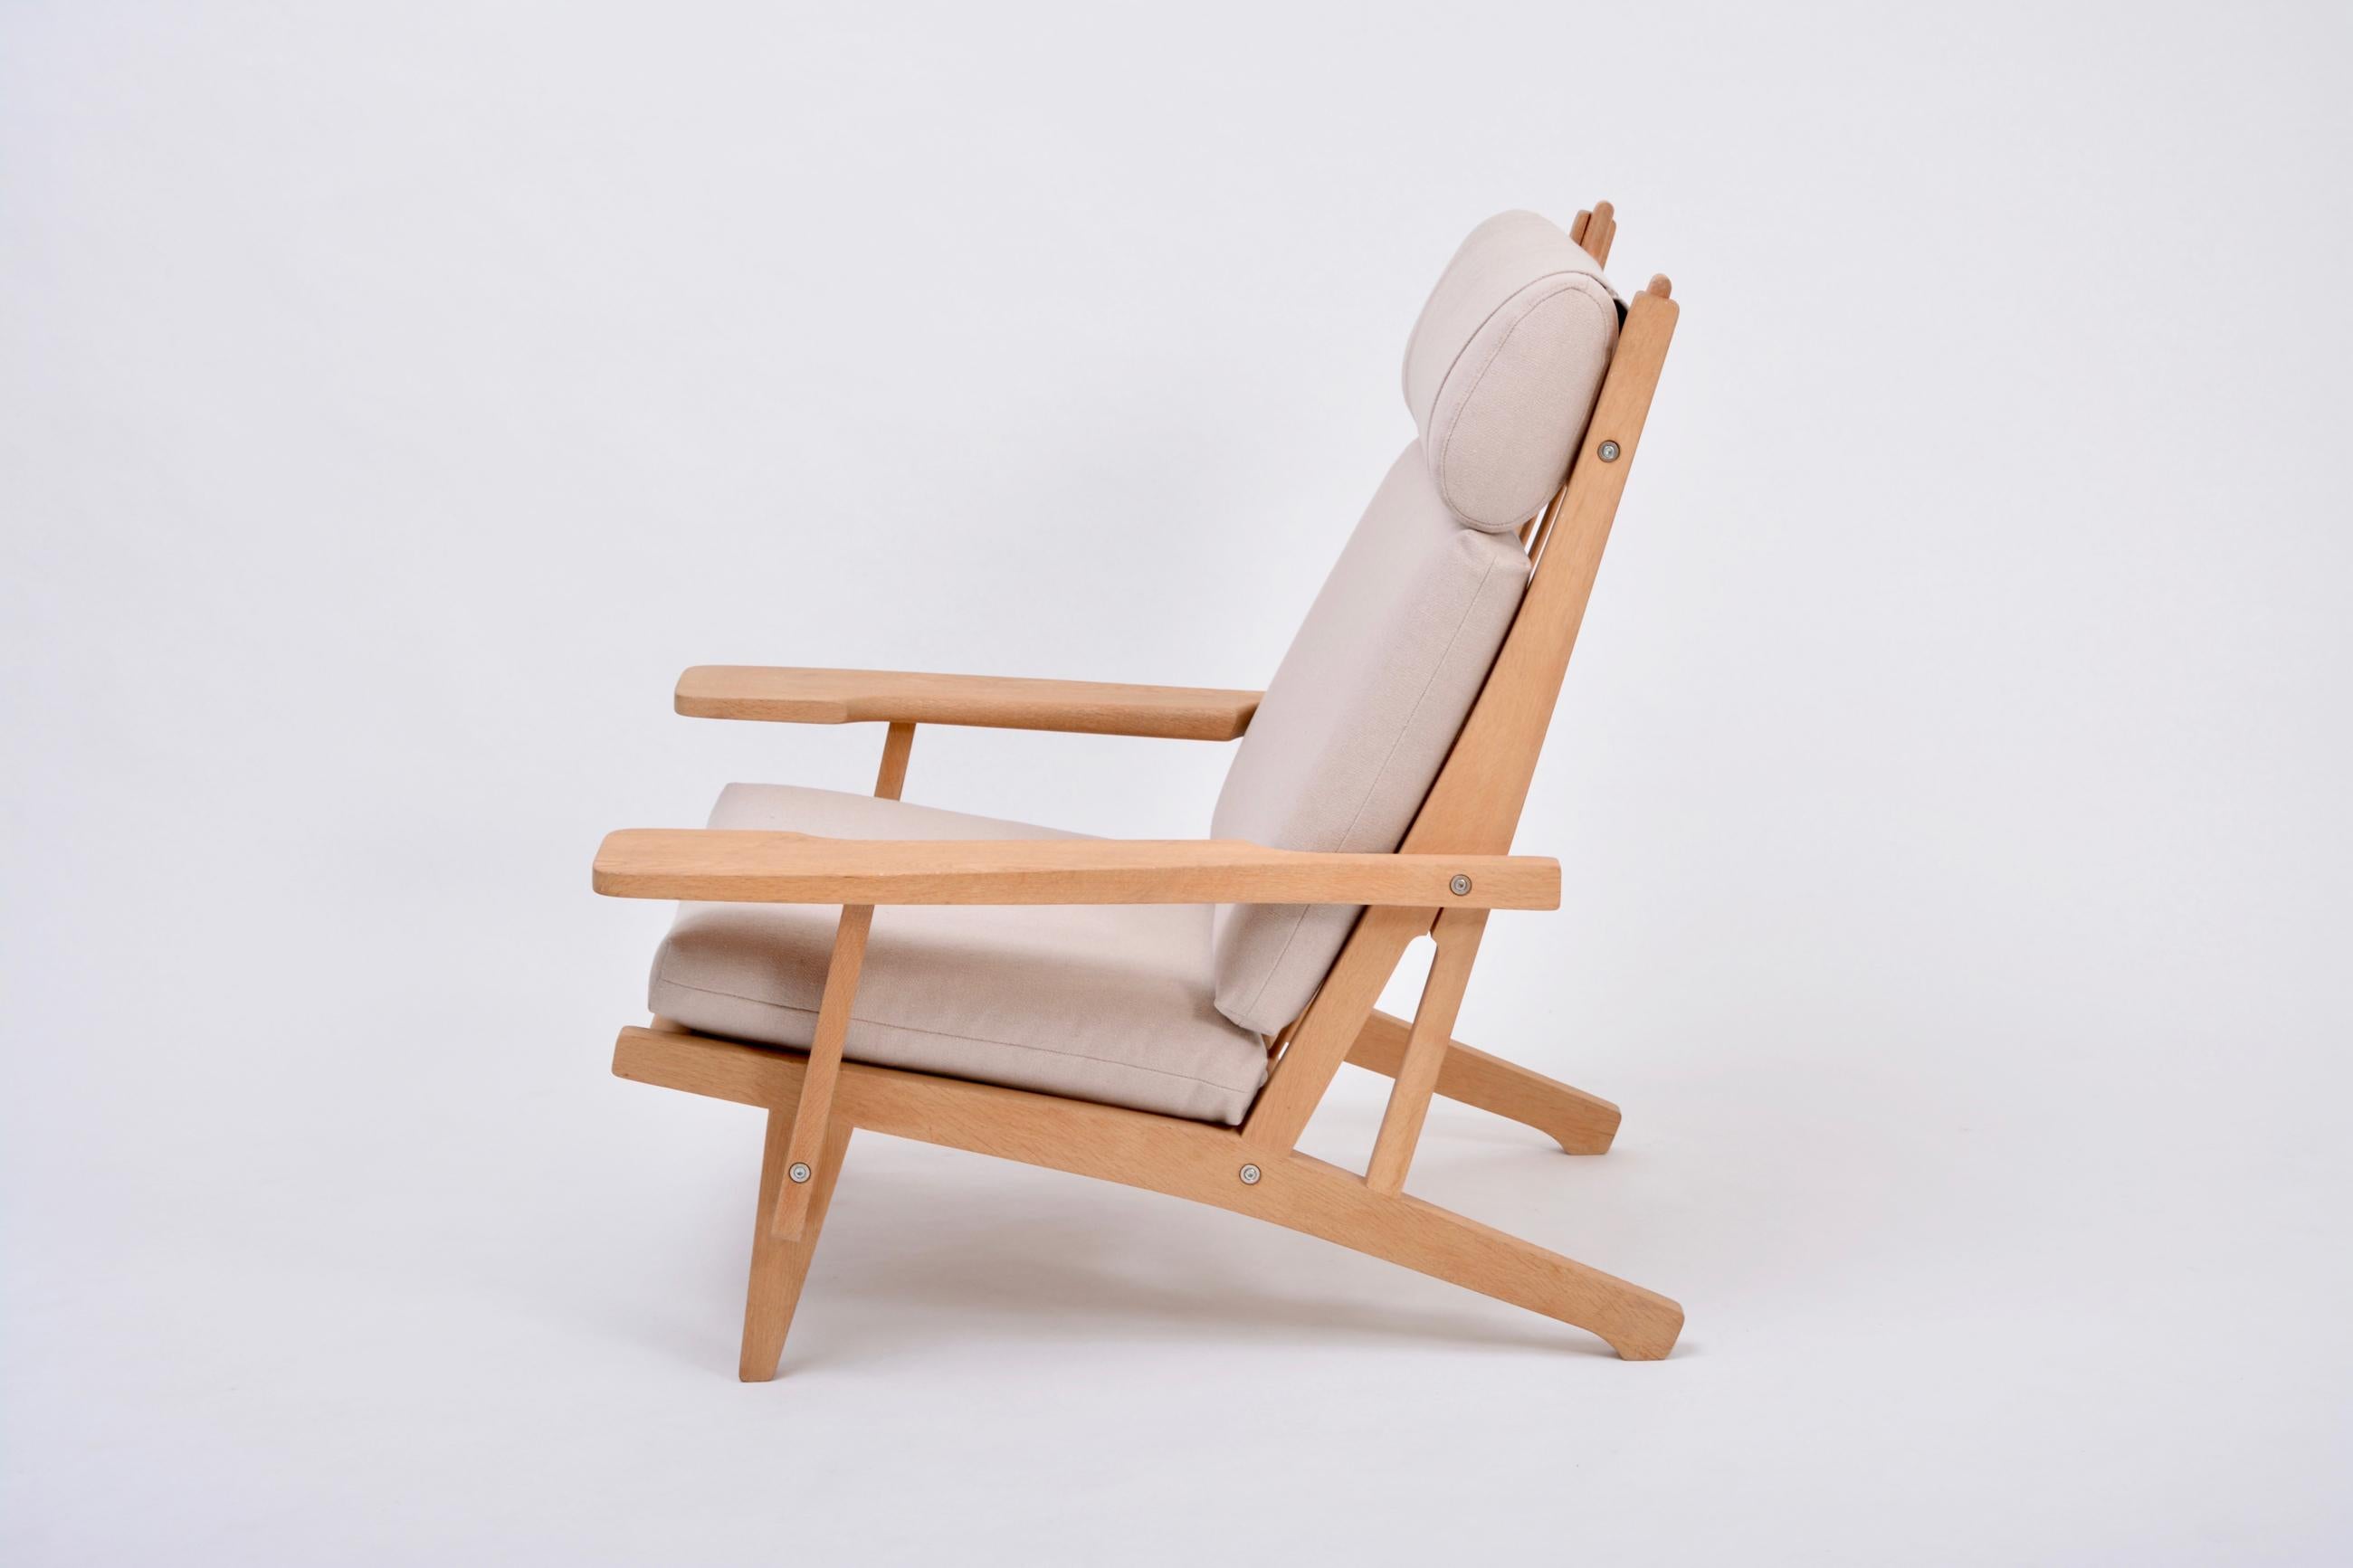 Danish Mid-Century Modern GE 375 easy chair by Hans J. Wegner for GETAMA

This easy chair is a version of the GE 375 model with armrests and a high backrest that Hans J. Wegner designed for GETAMA in 1969. The frame is made from oak; the loose